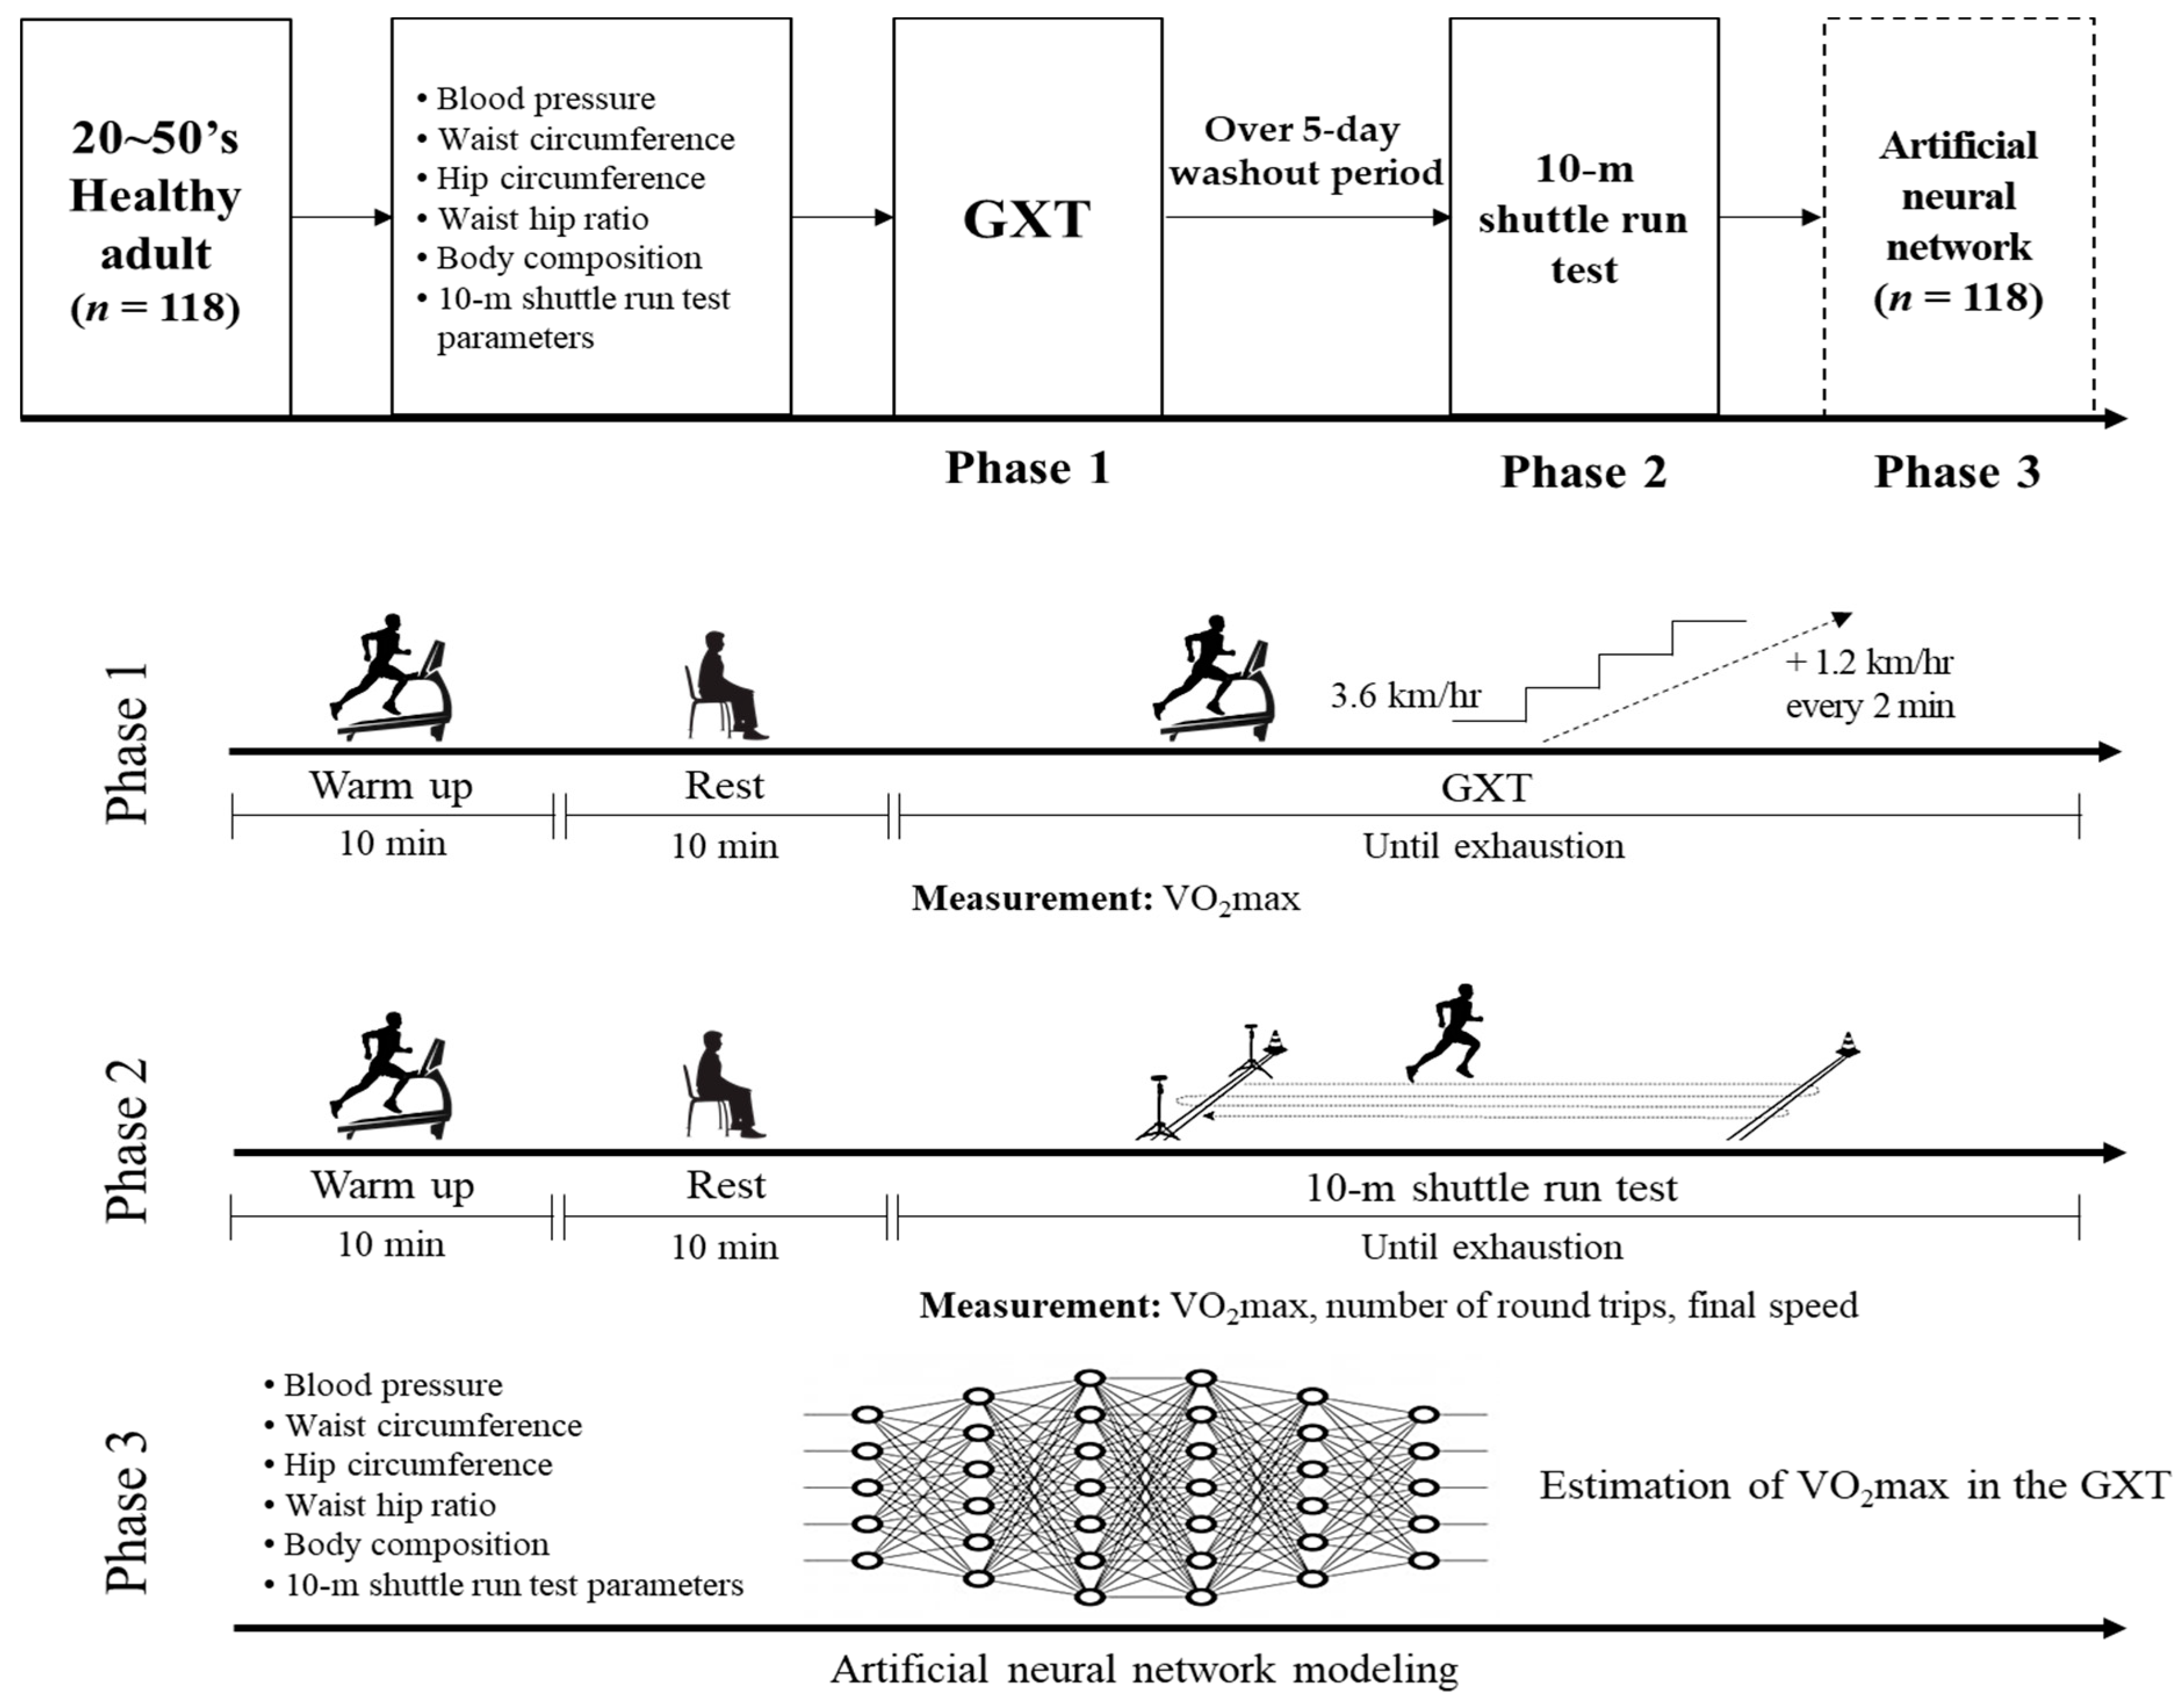 IJERPH | Free Full-Text | Estimated Artificial Neural Network Modeling of  Maximal Oxygen Uptake Based on Multistage 10-m Shuttle Run Test in Healthy  Adults